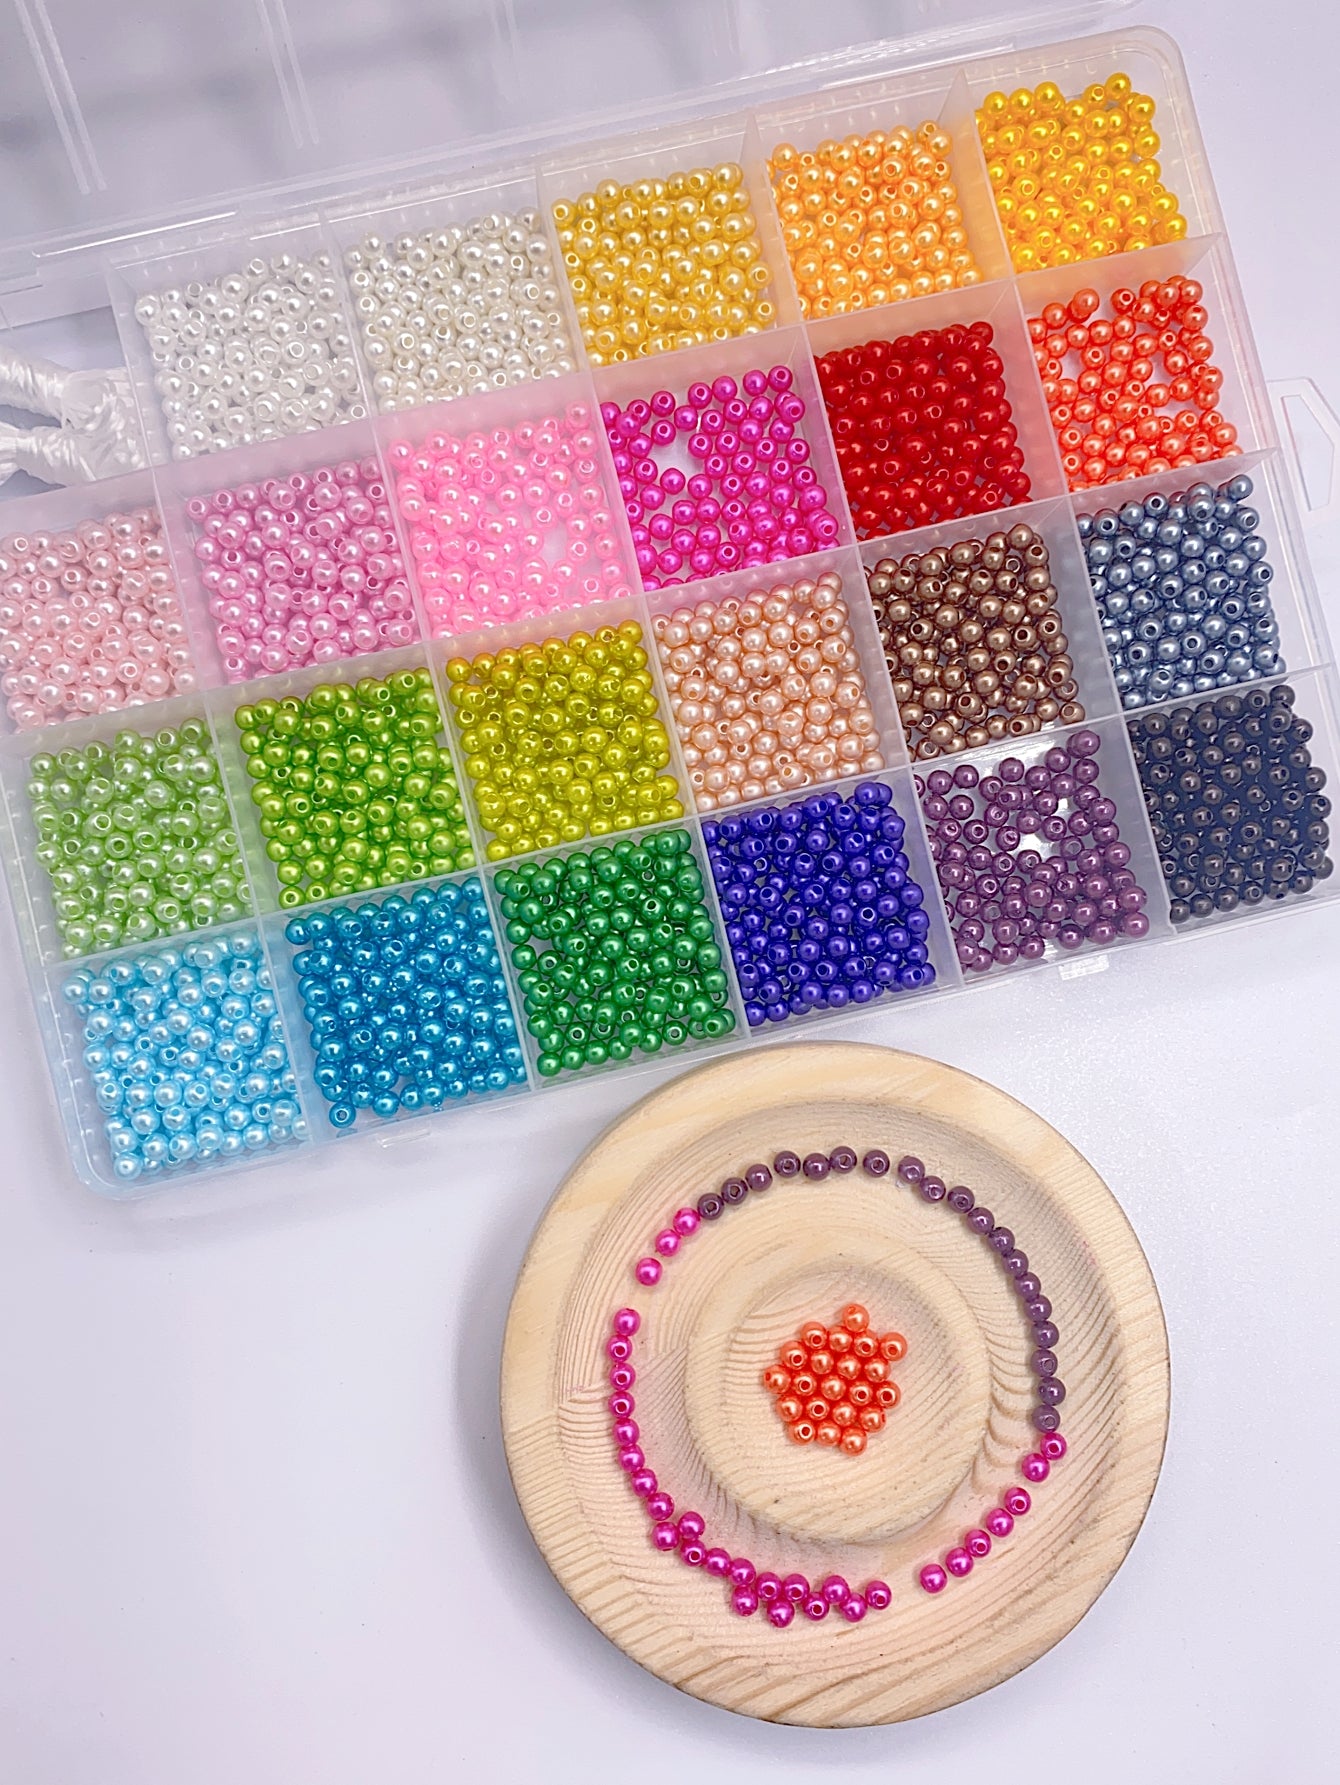 New hand-made diy24 palace abs seven-color straight hole imitation pearl mix children's puzzle beading material 1 box